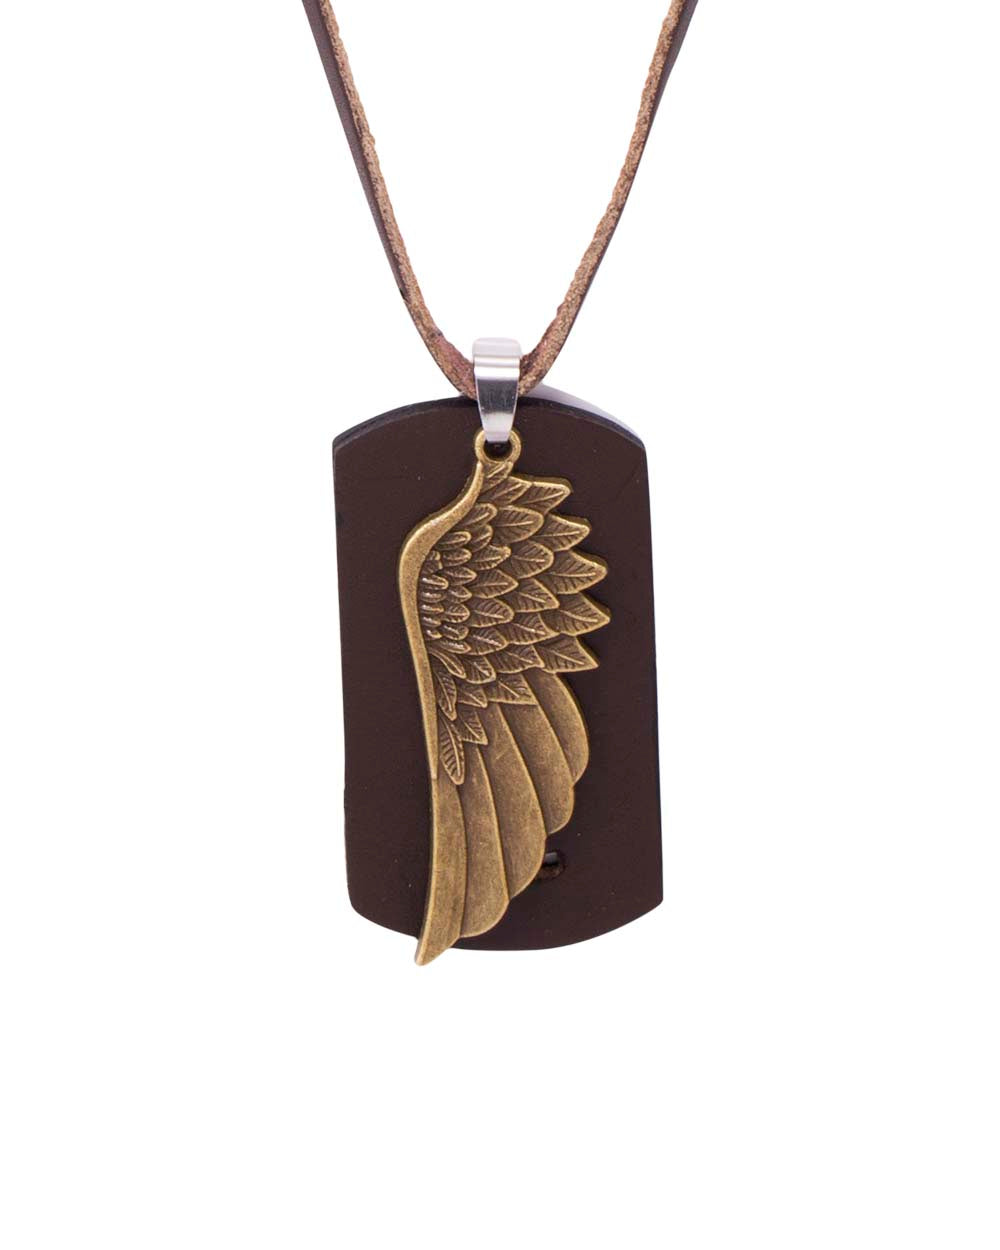 Oxidized Feather Design Pendant With Chain